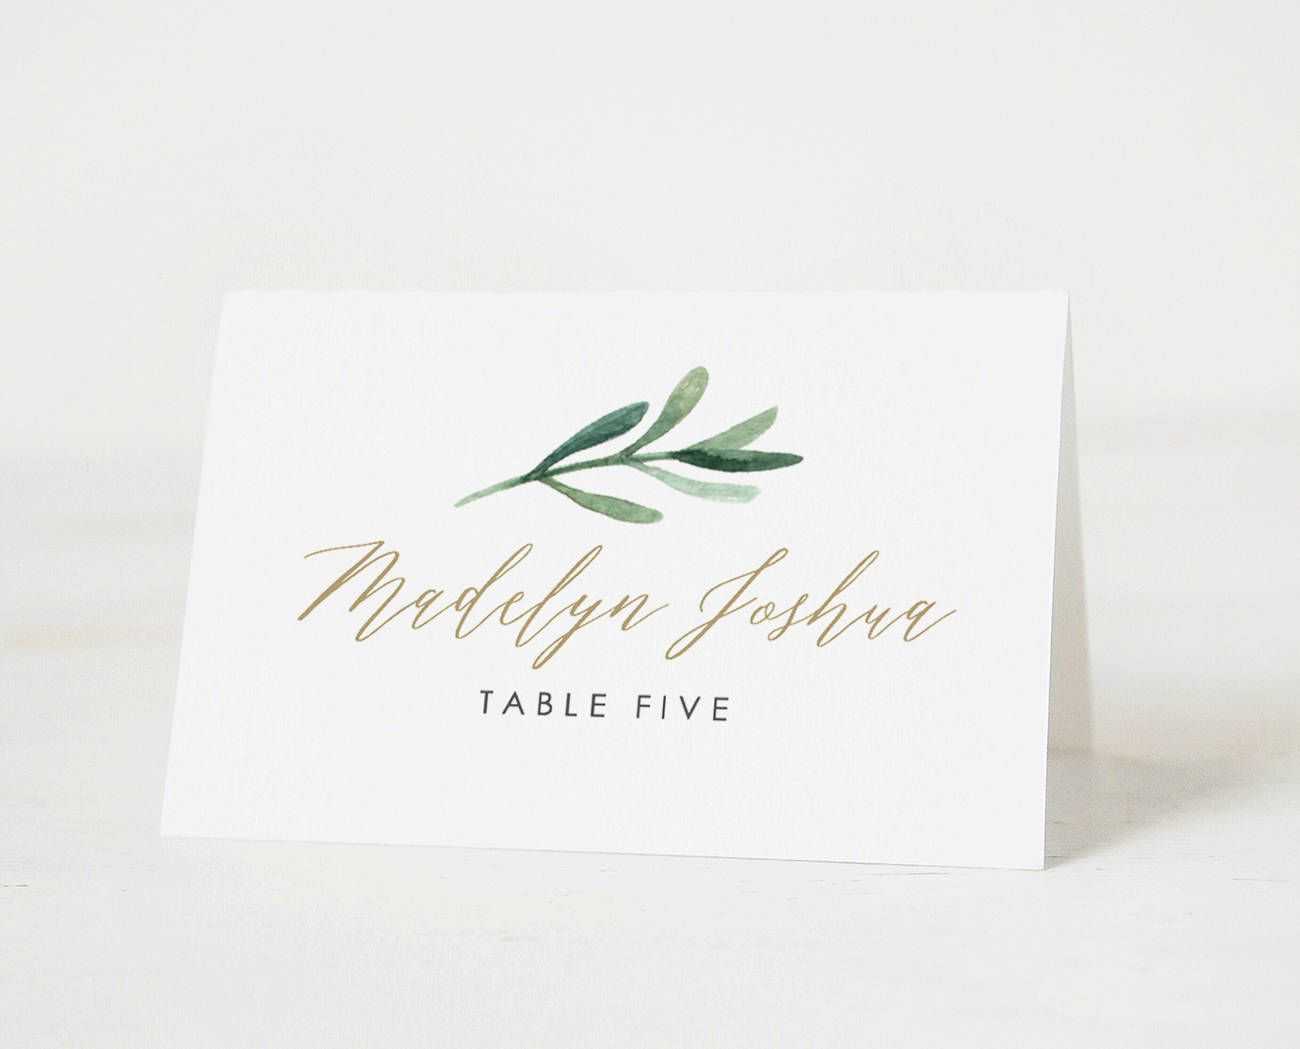 004 Template Ideas Name Place Cards Marvelous Card Free With Place Card Setting Template